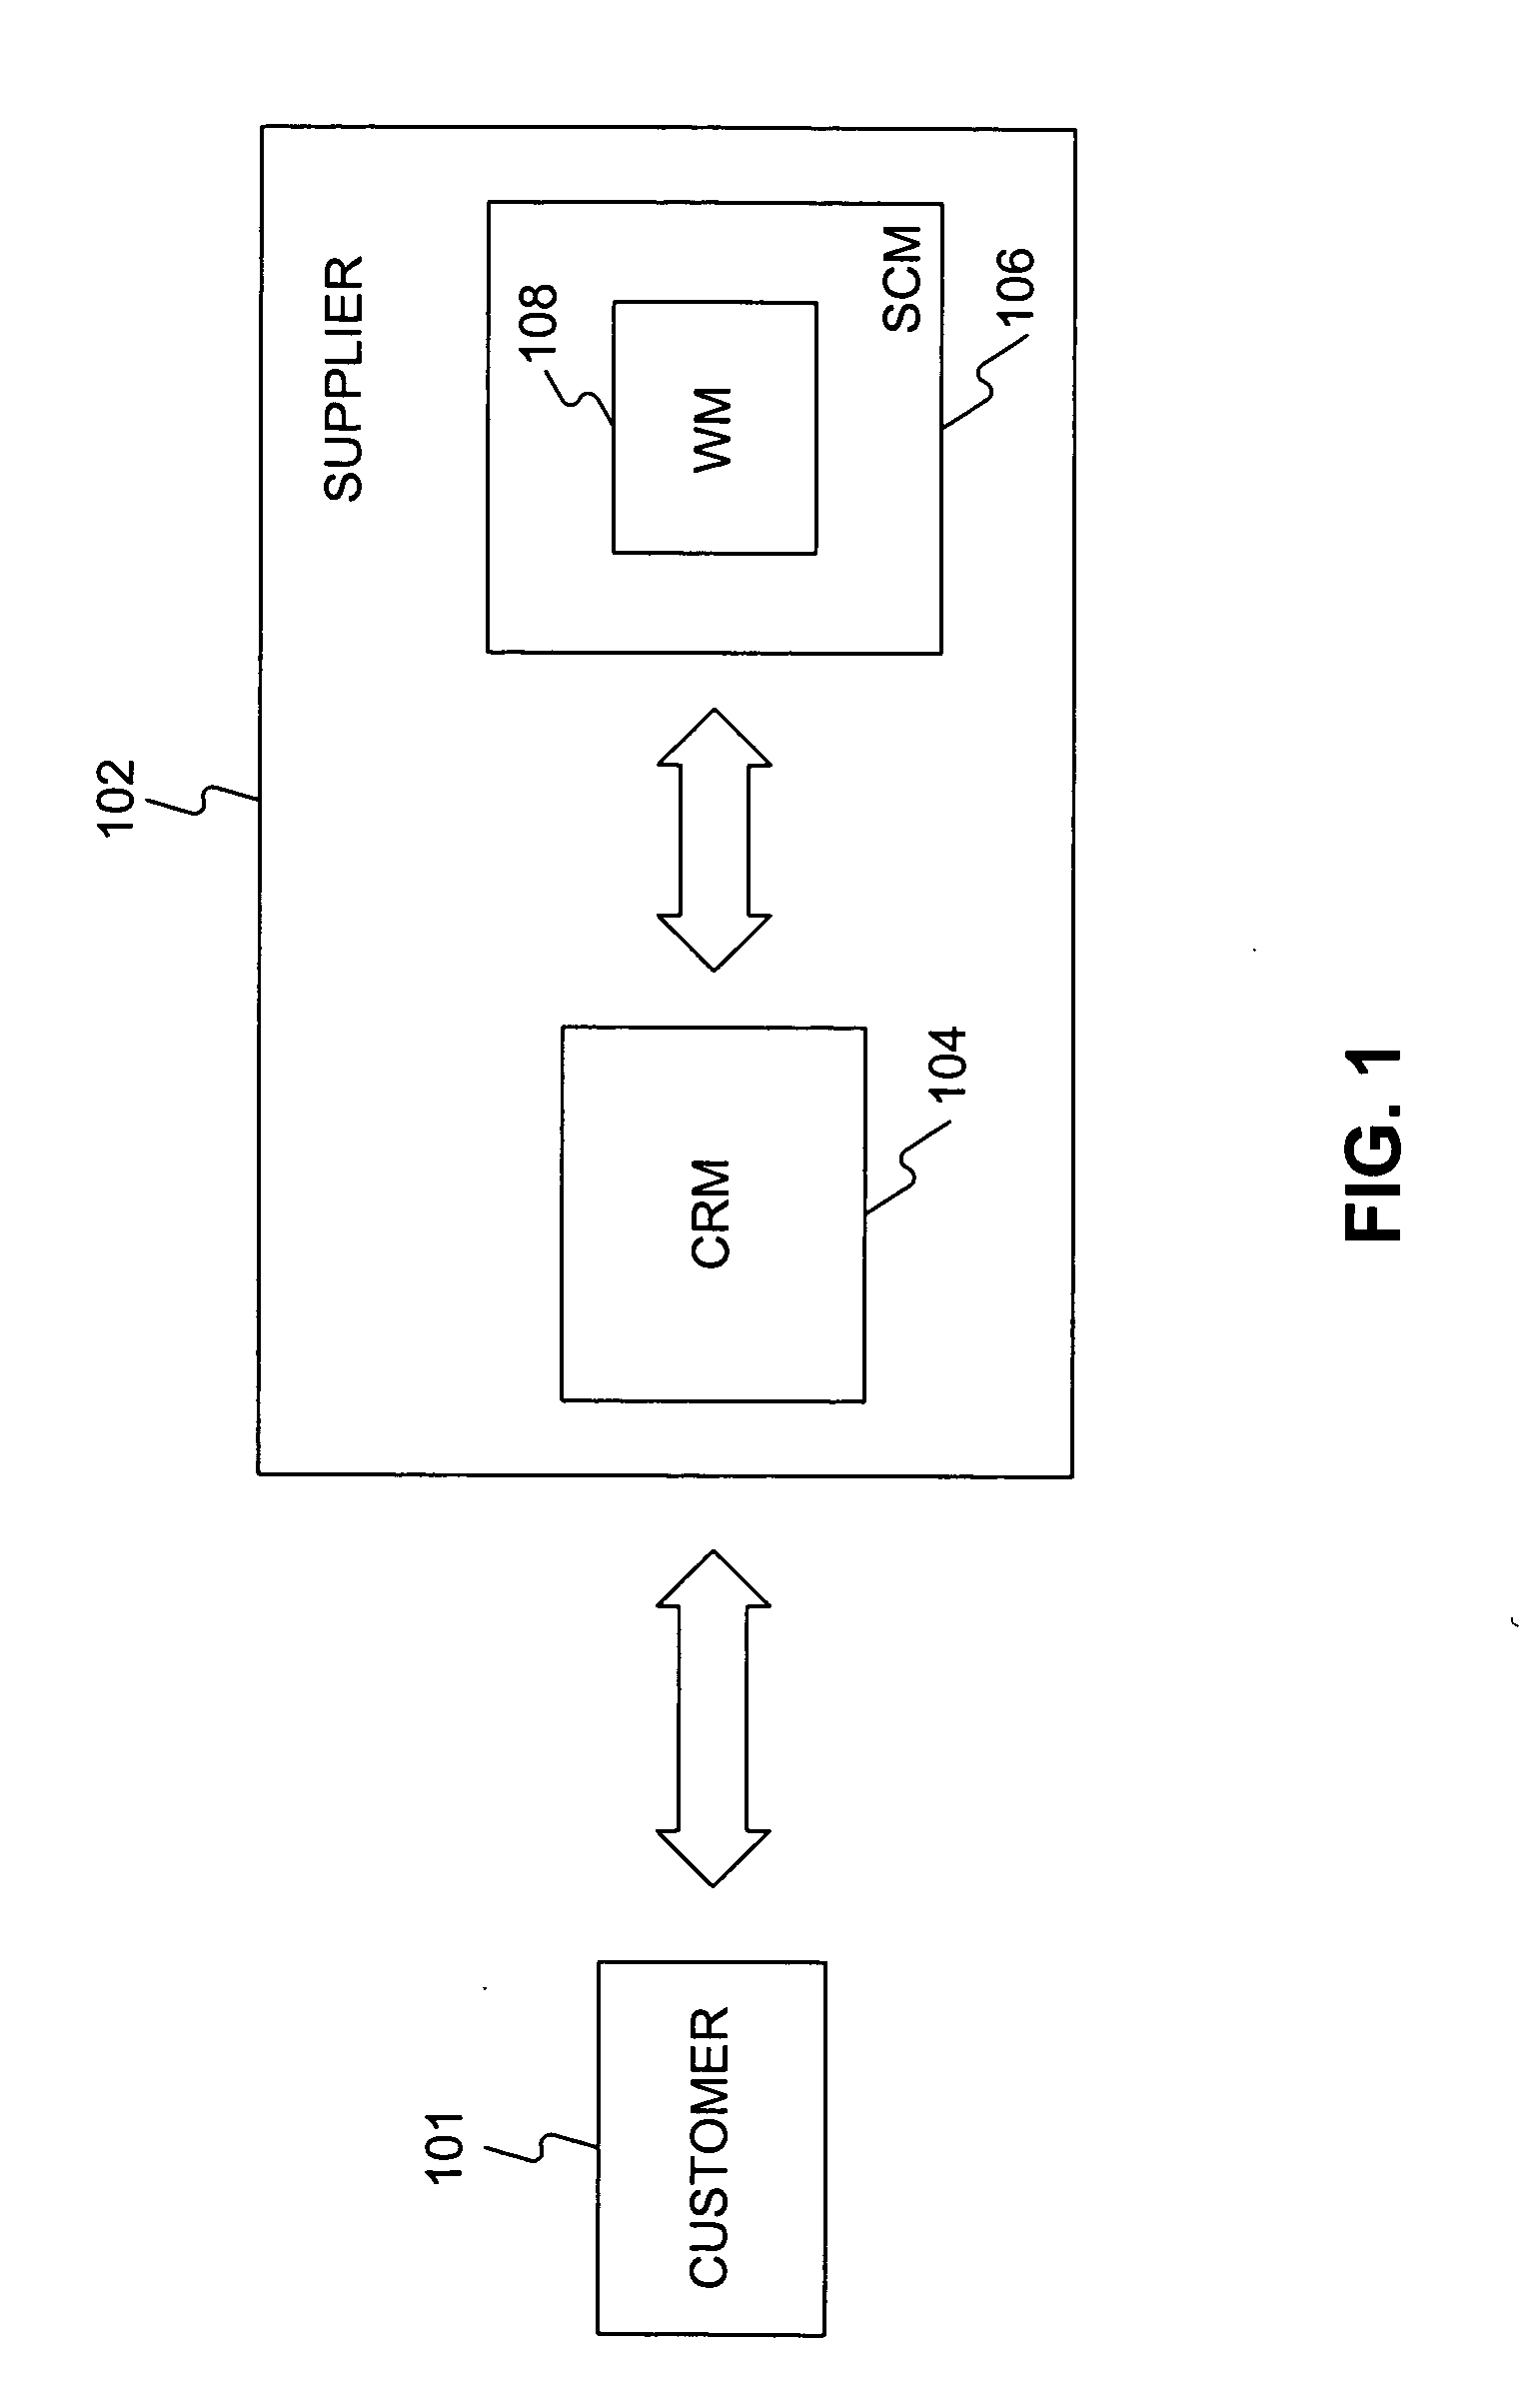 Systems and methods for managing product returns using return authorization numbers